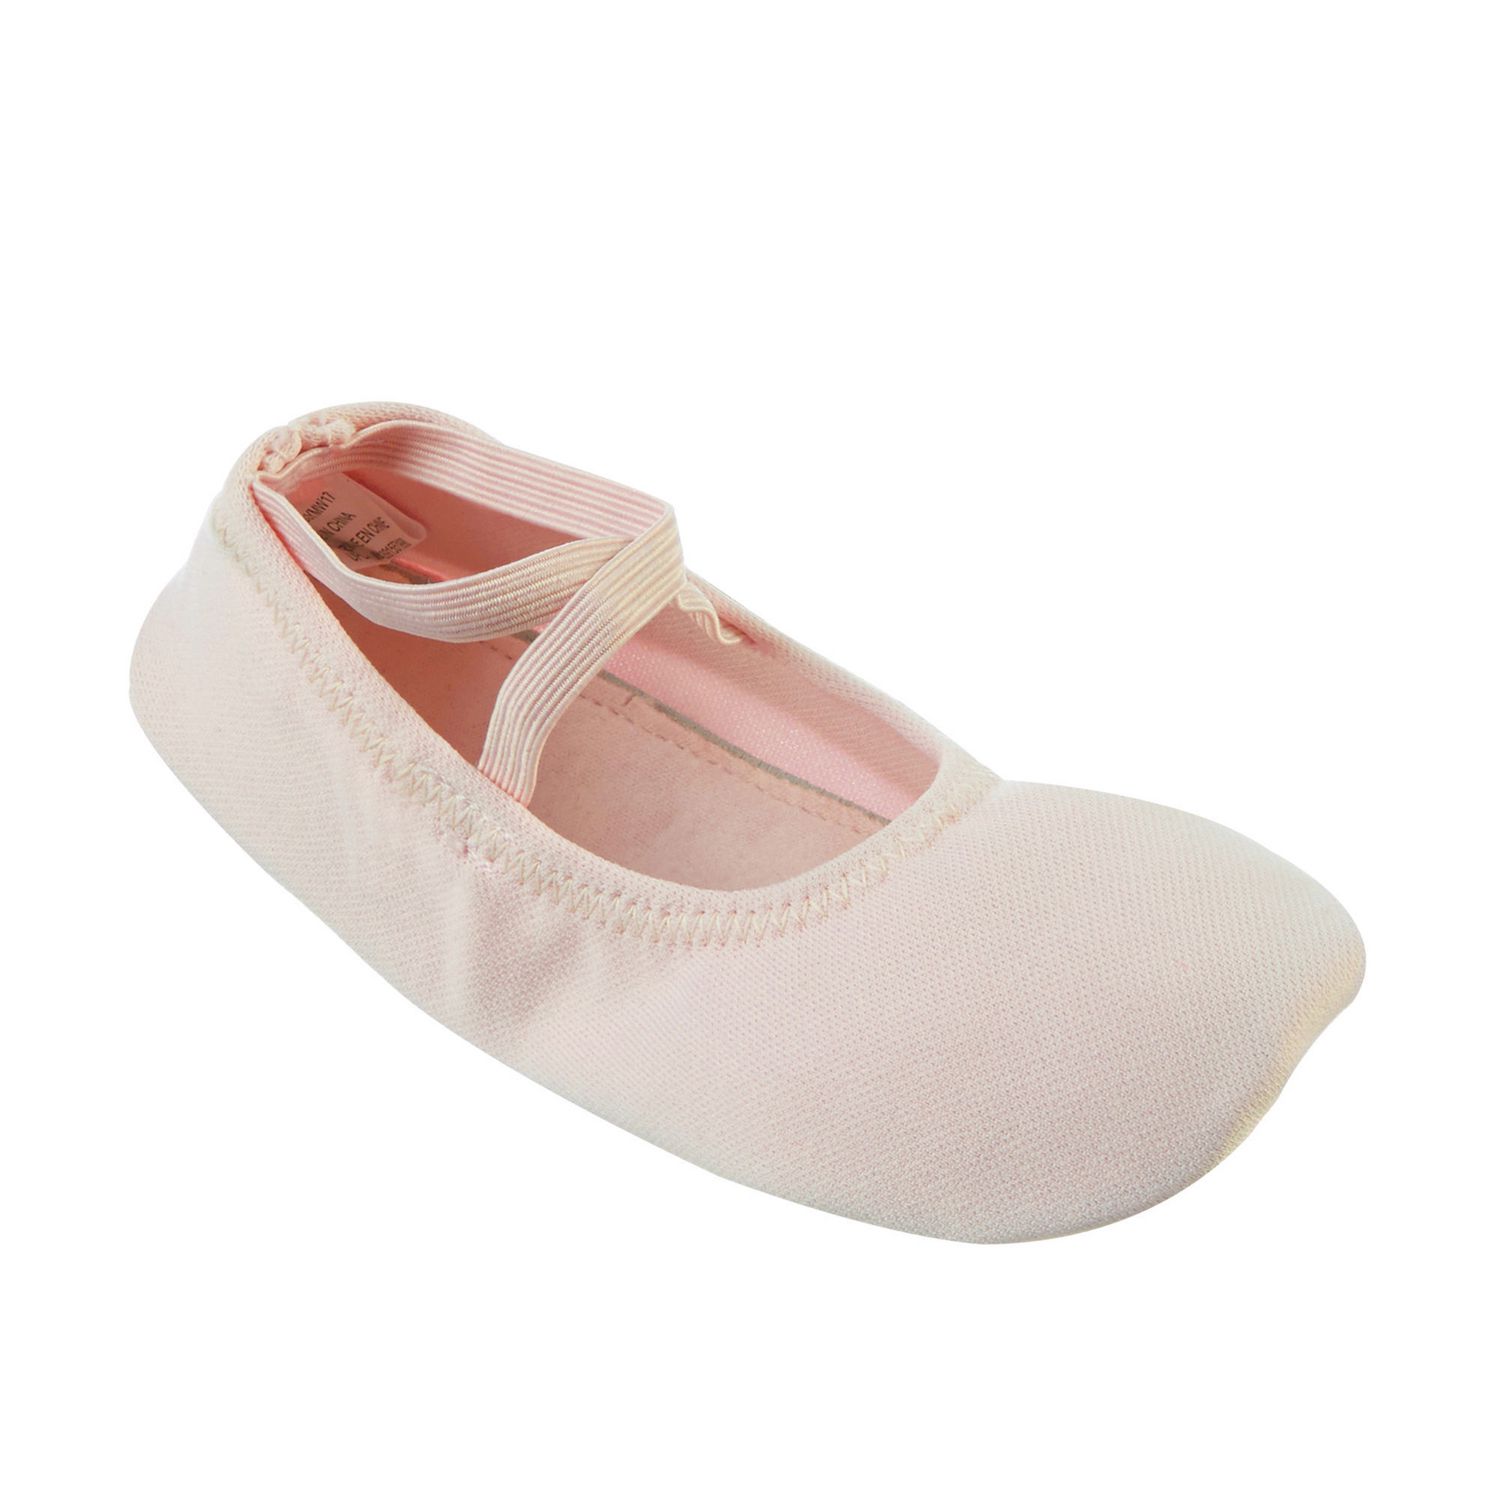 Athletic Works Toddler Girl's Gymnastic Slippers | Walmart Canada